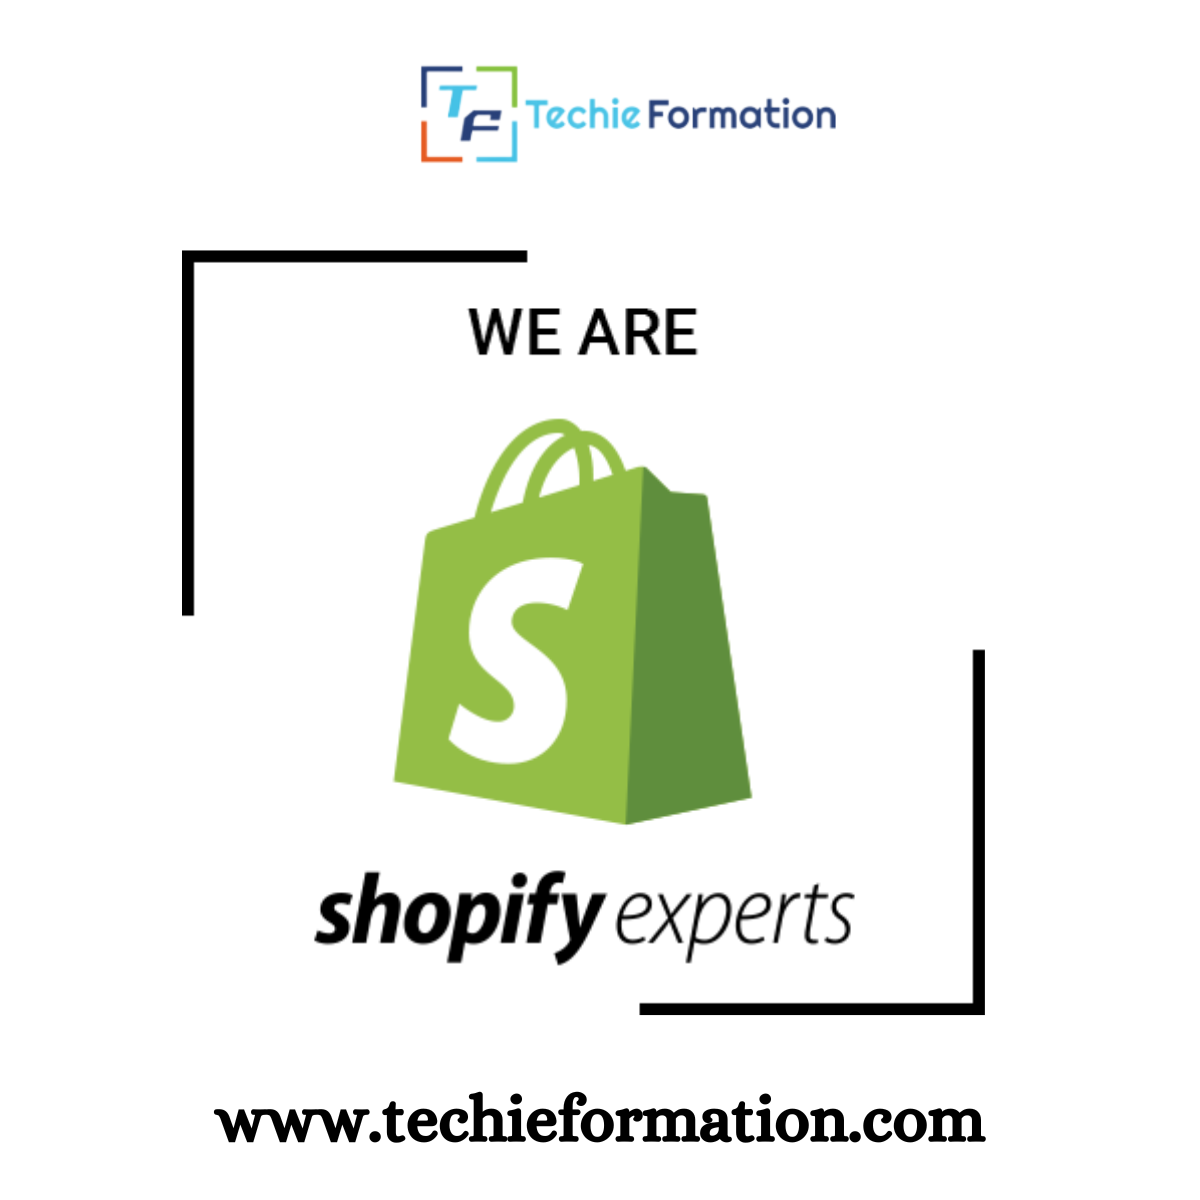 TechieFormation is an Indian Shopify Development Company